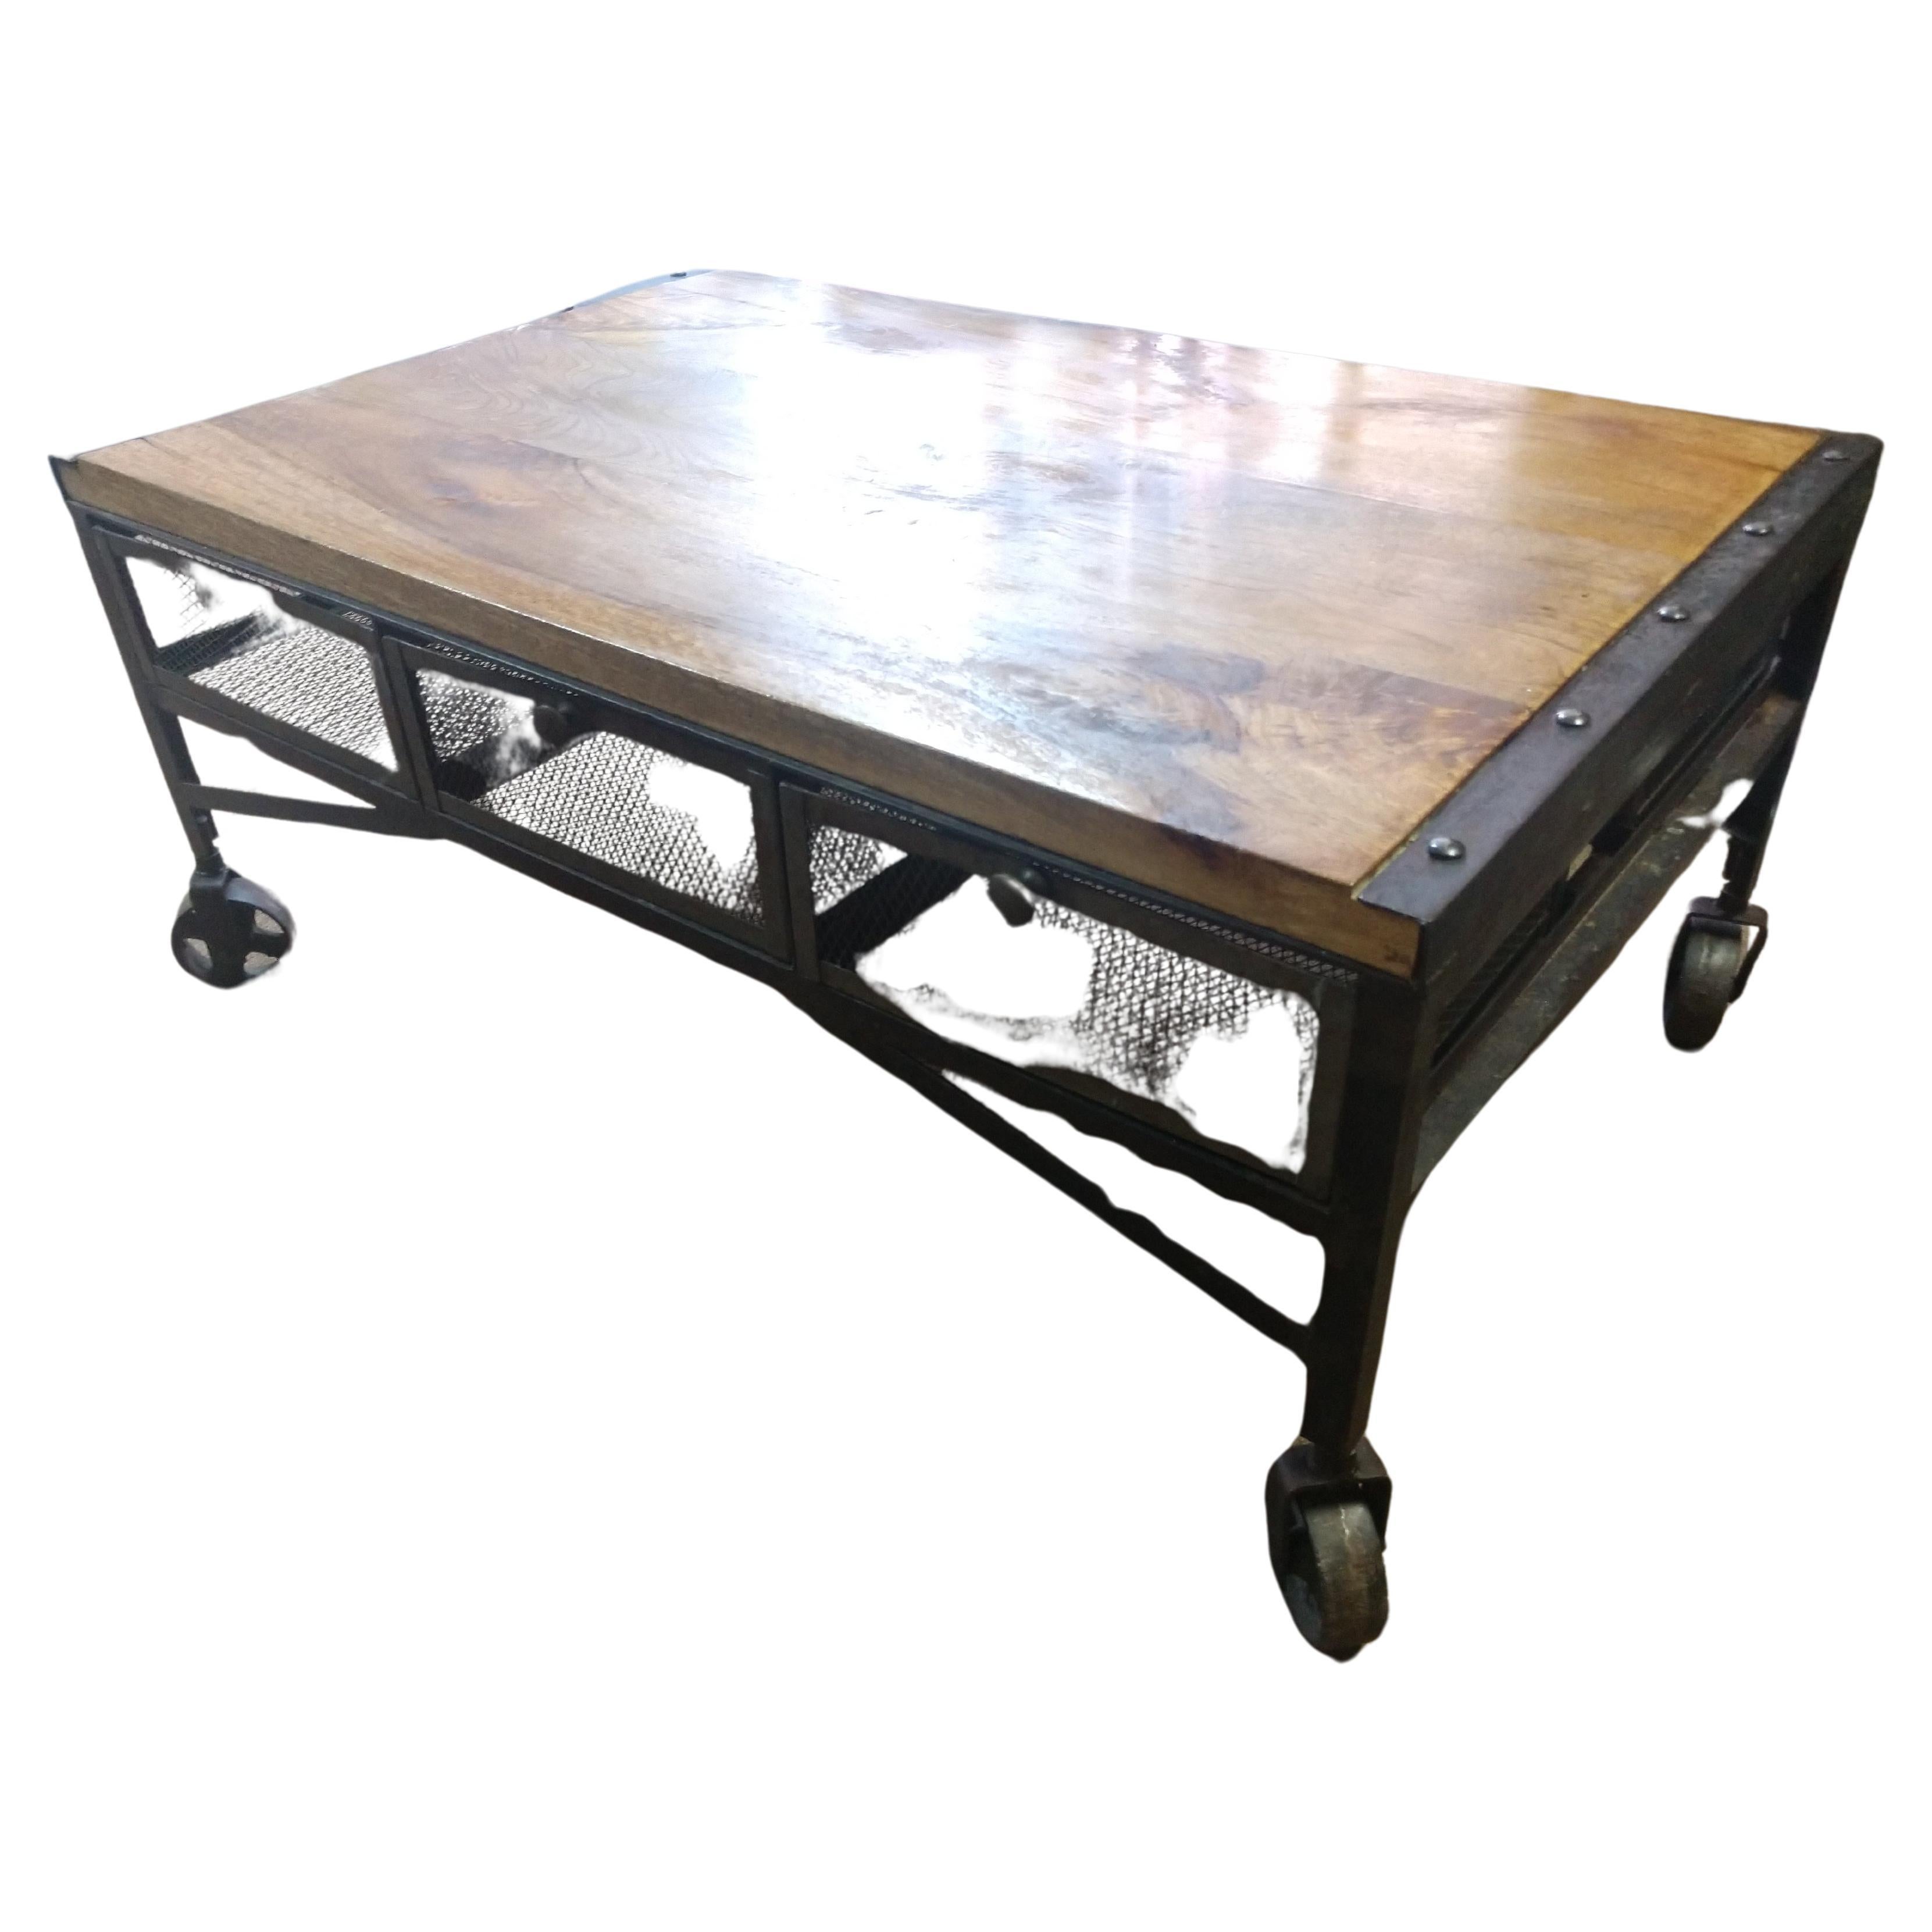 Stained Industrial Style Loading Dock Cart Cocktail Table Six Wire Basket Drawers For Sale